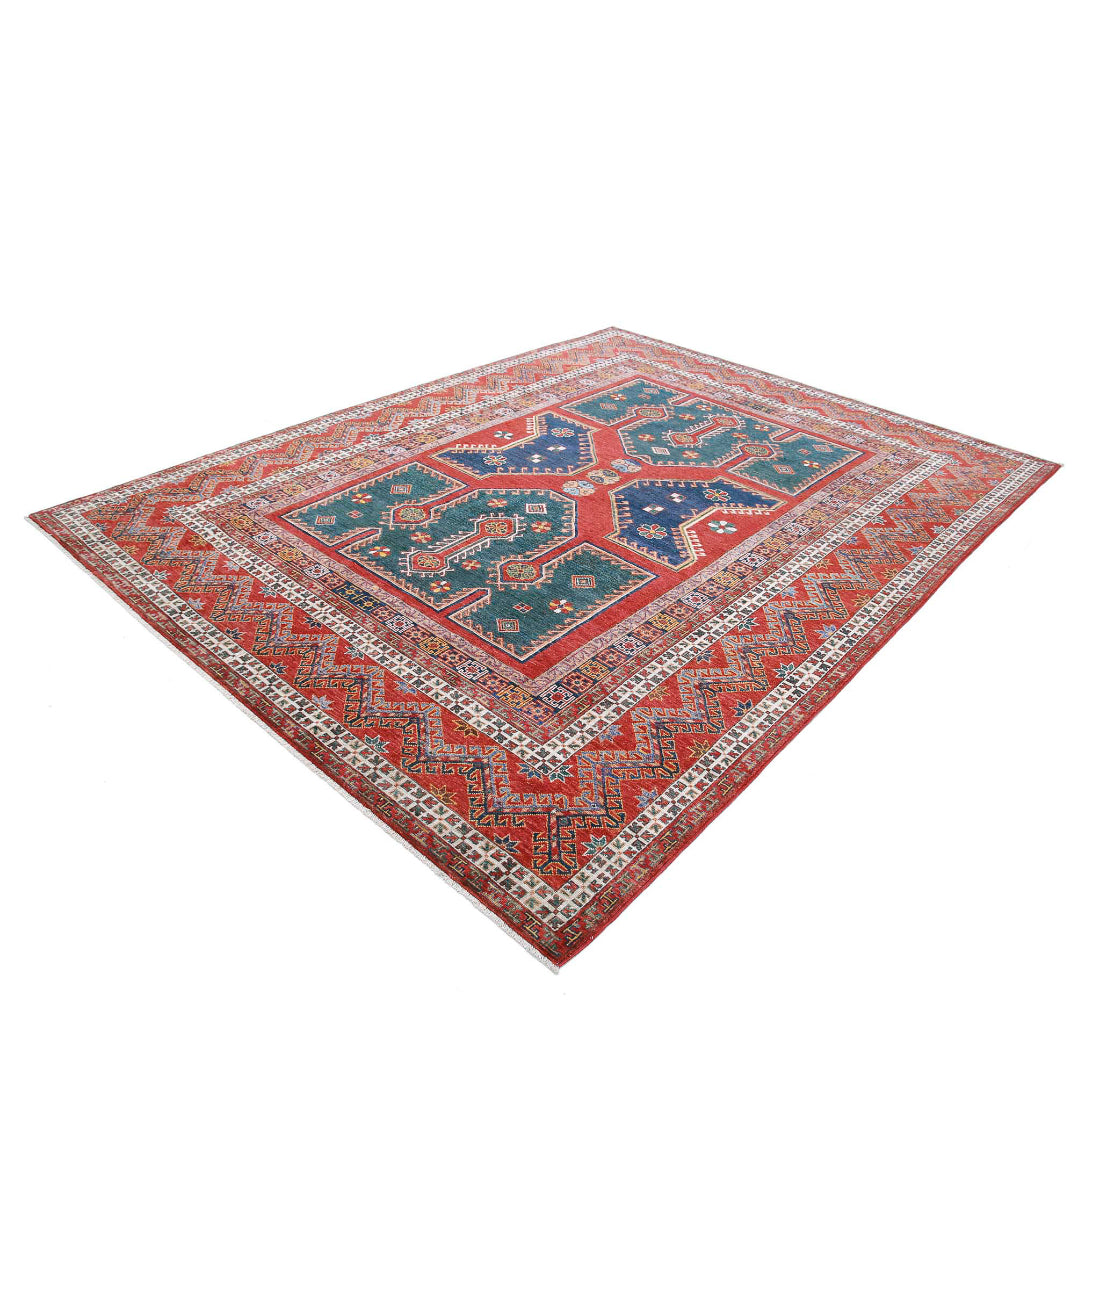 Hand Knotted Nomadic Caucasian Humna Wool Rug - 8'2'' x 10'8'' 8'2'' x 10'8'' (245 X 320) / Green / Rust